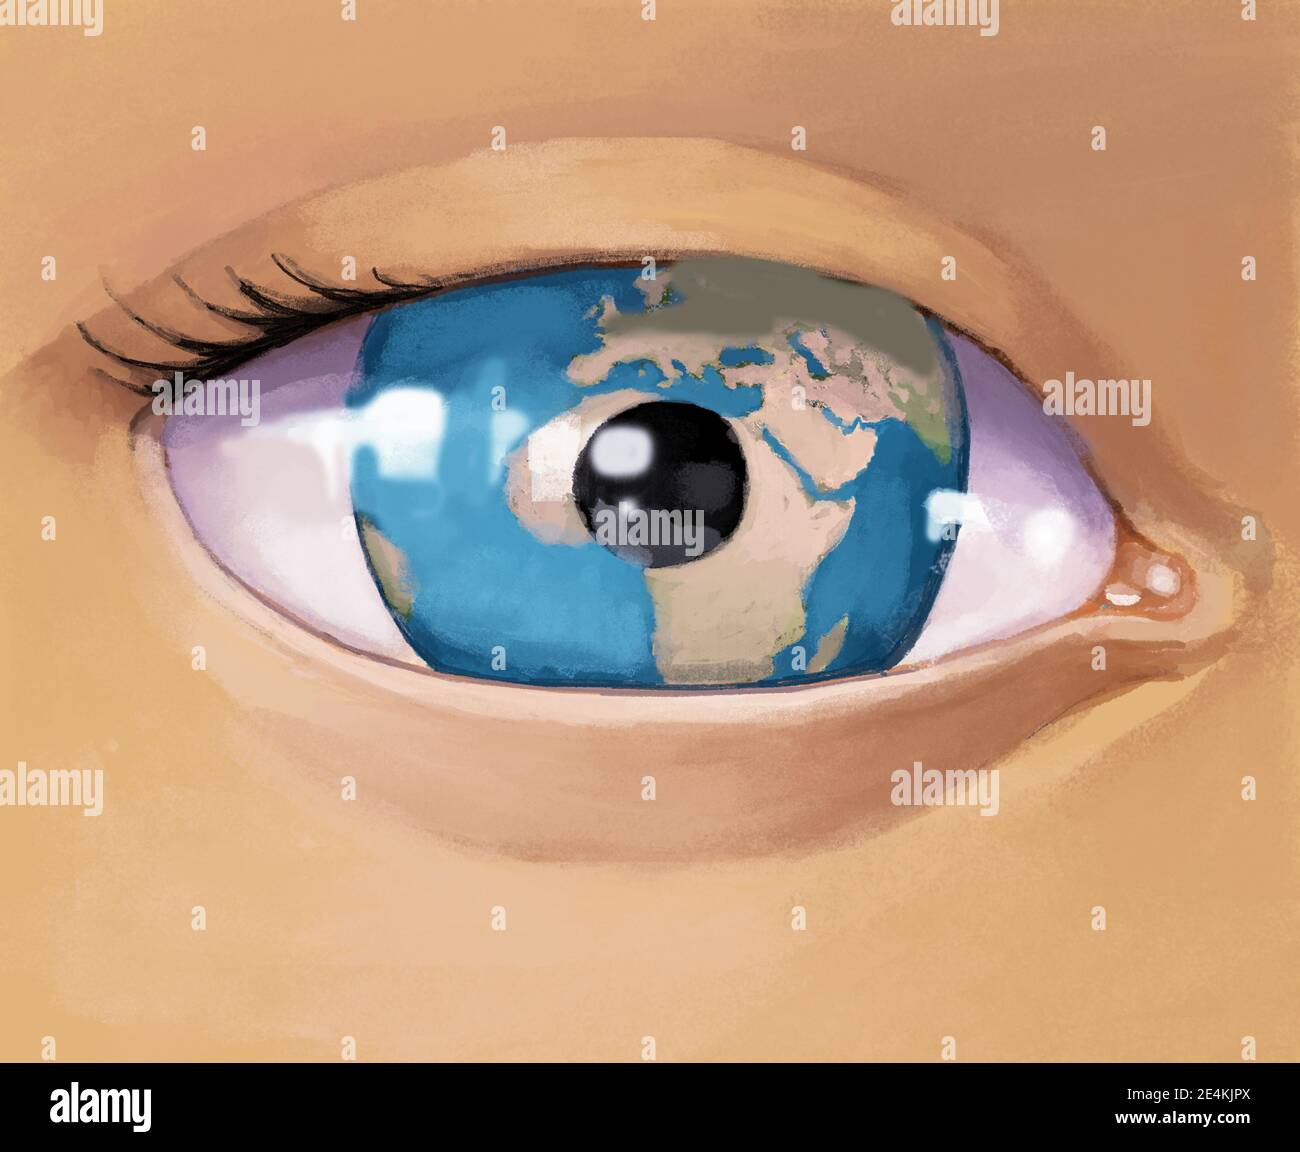 close up of an eye yhe iris is made from a world curious gaze metaphr surreal digital illustration Stock Photo